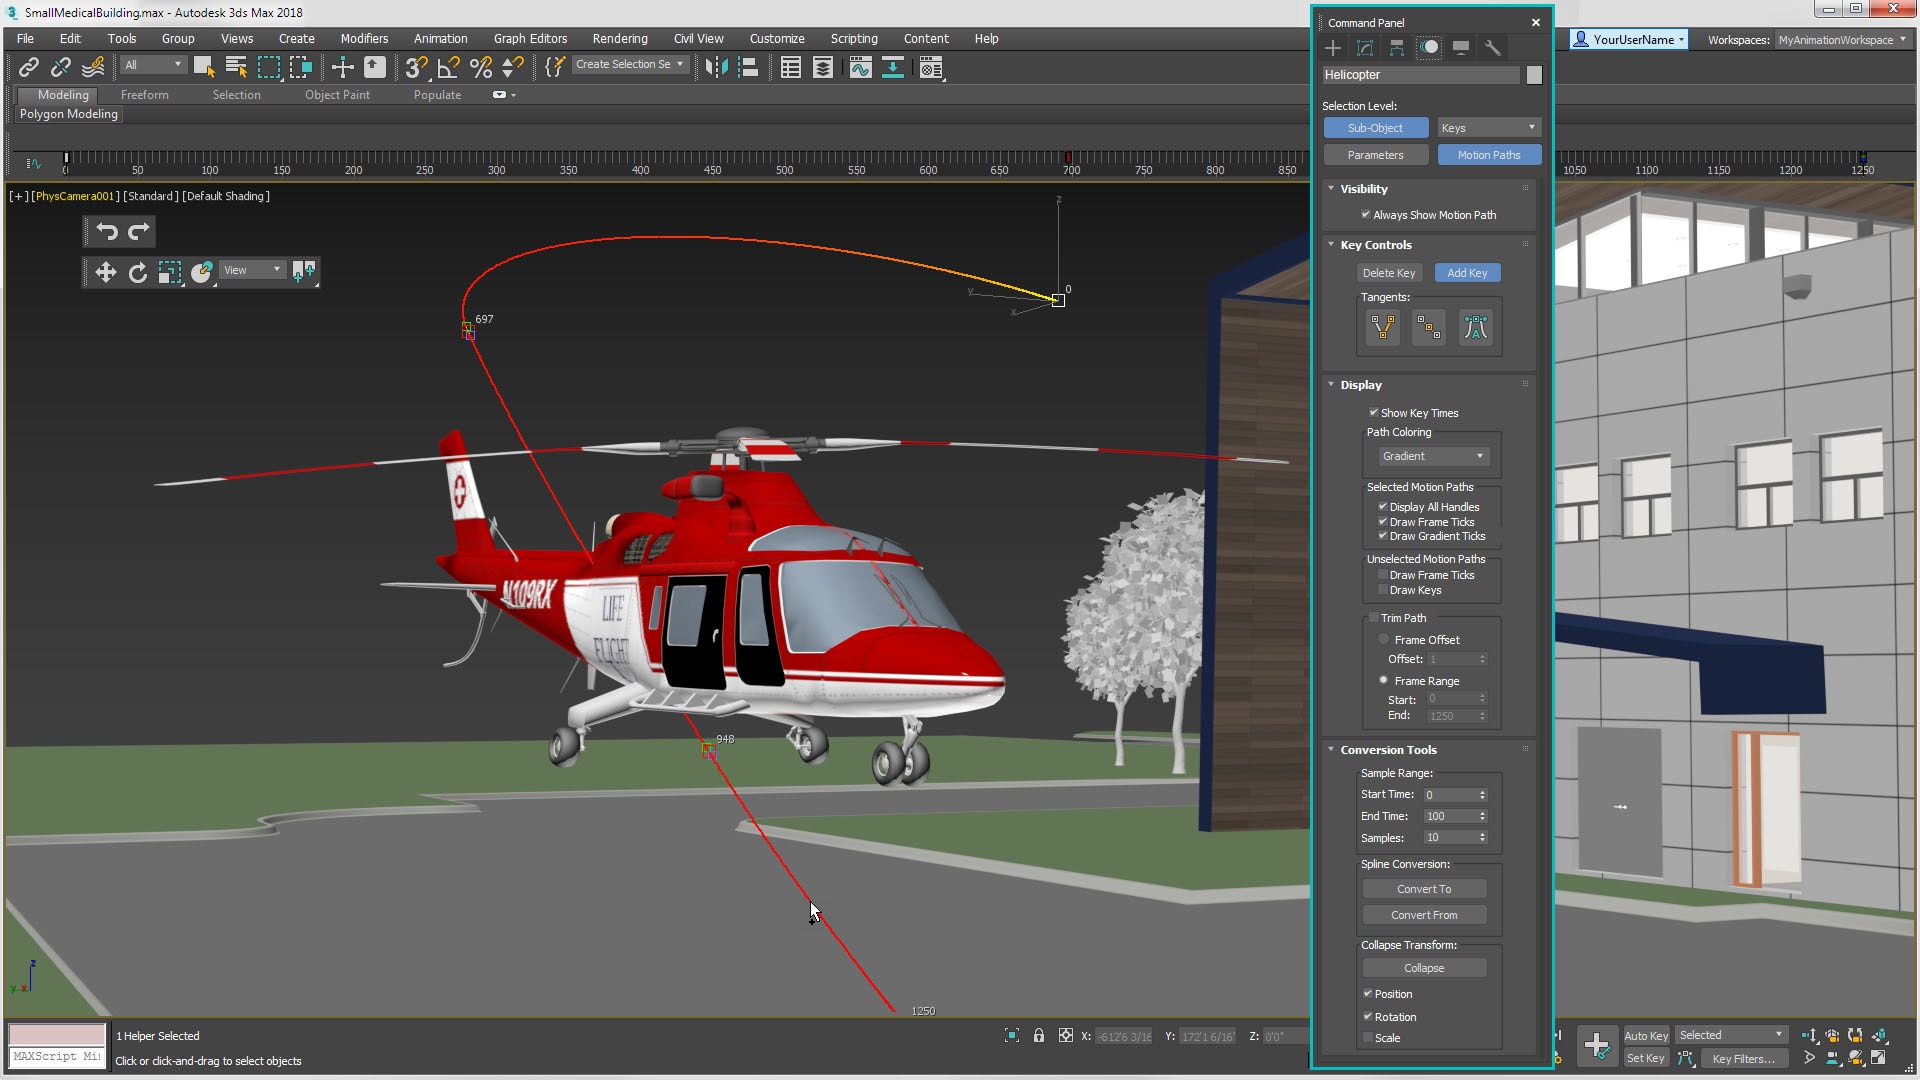 3ds max 2010 64 bit free download full version with crack